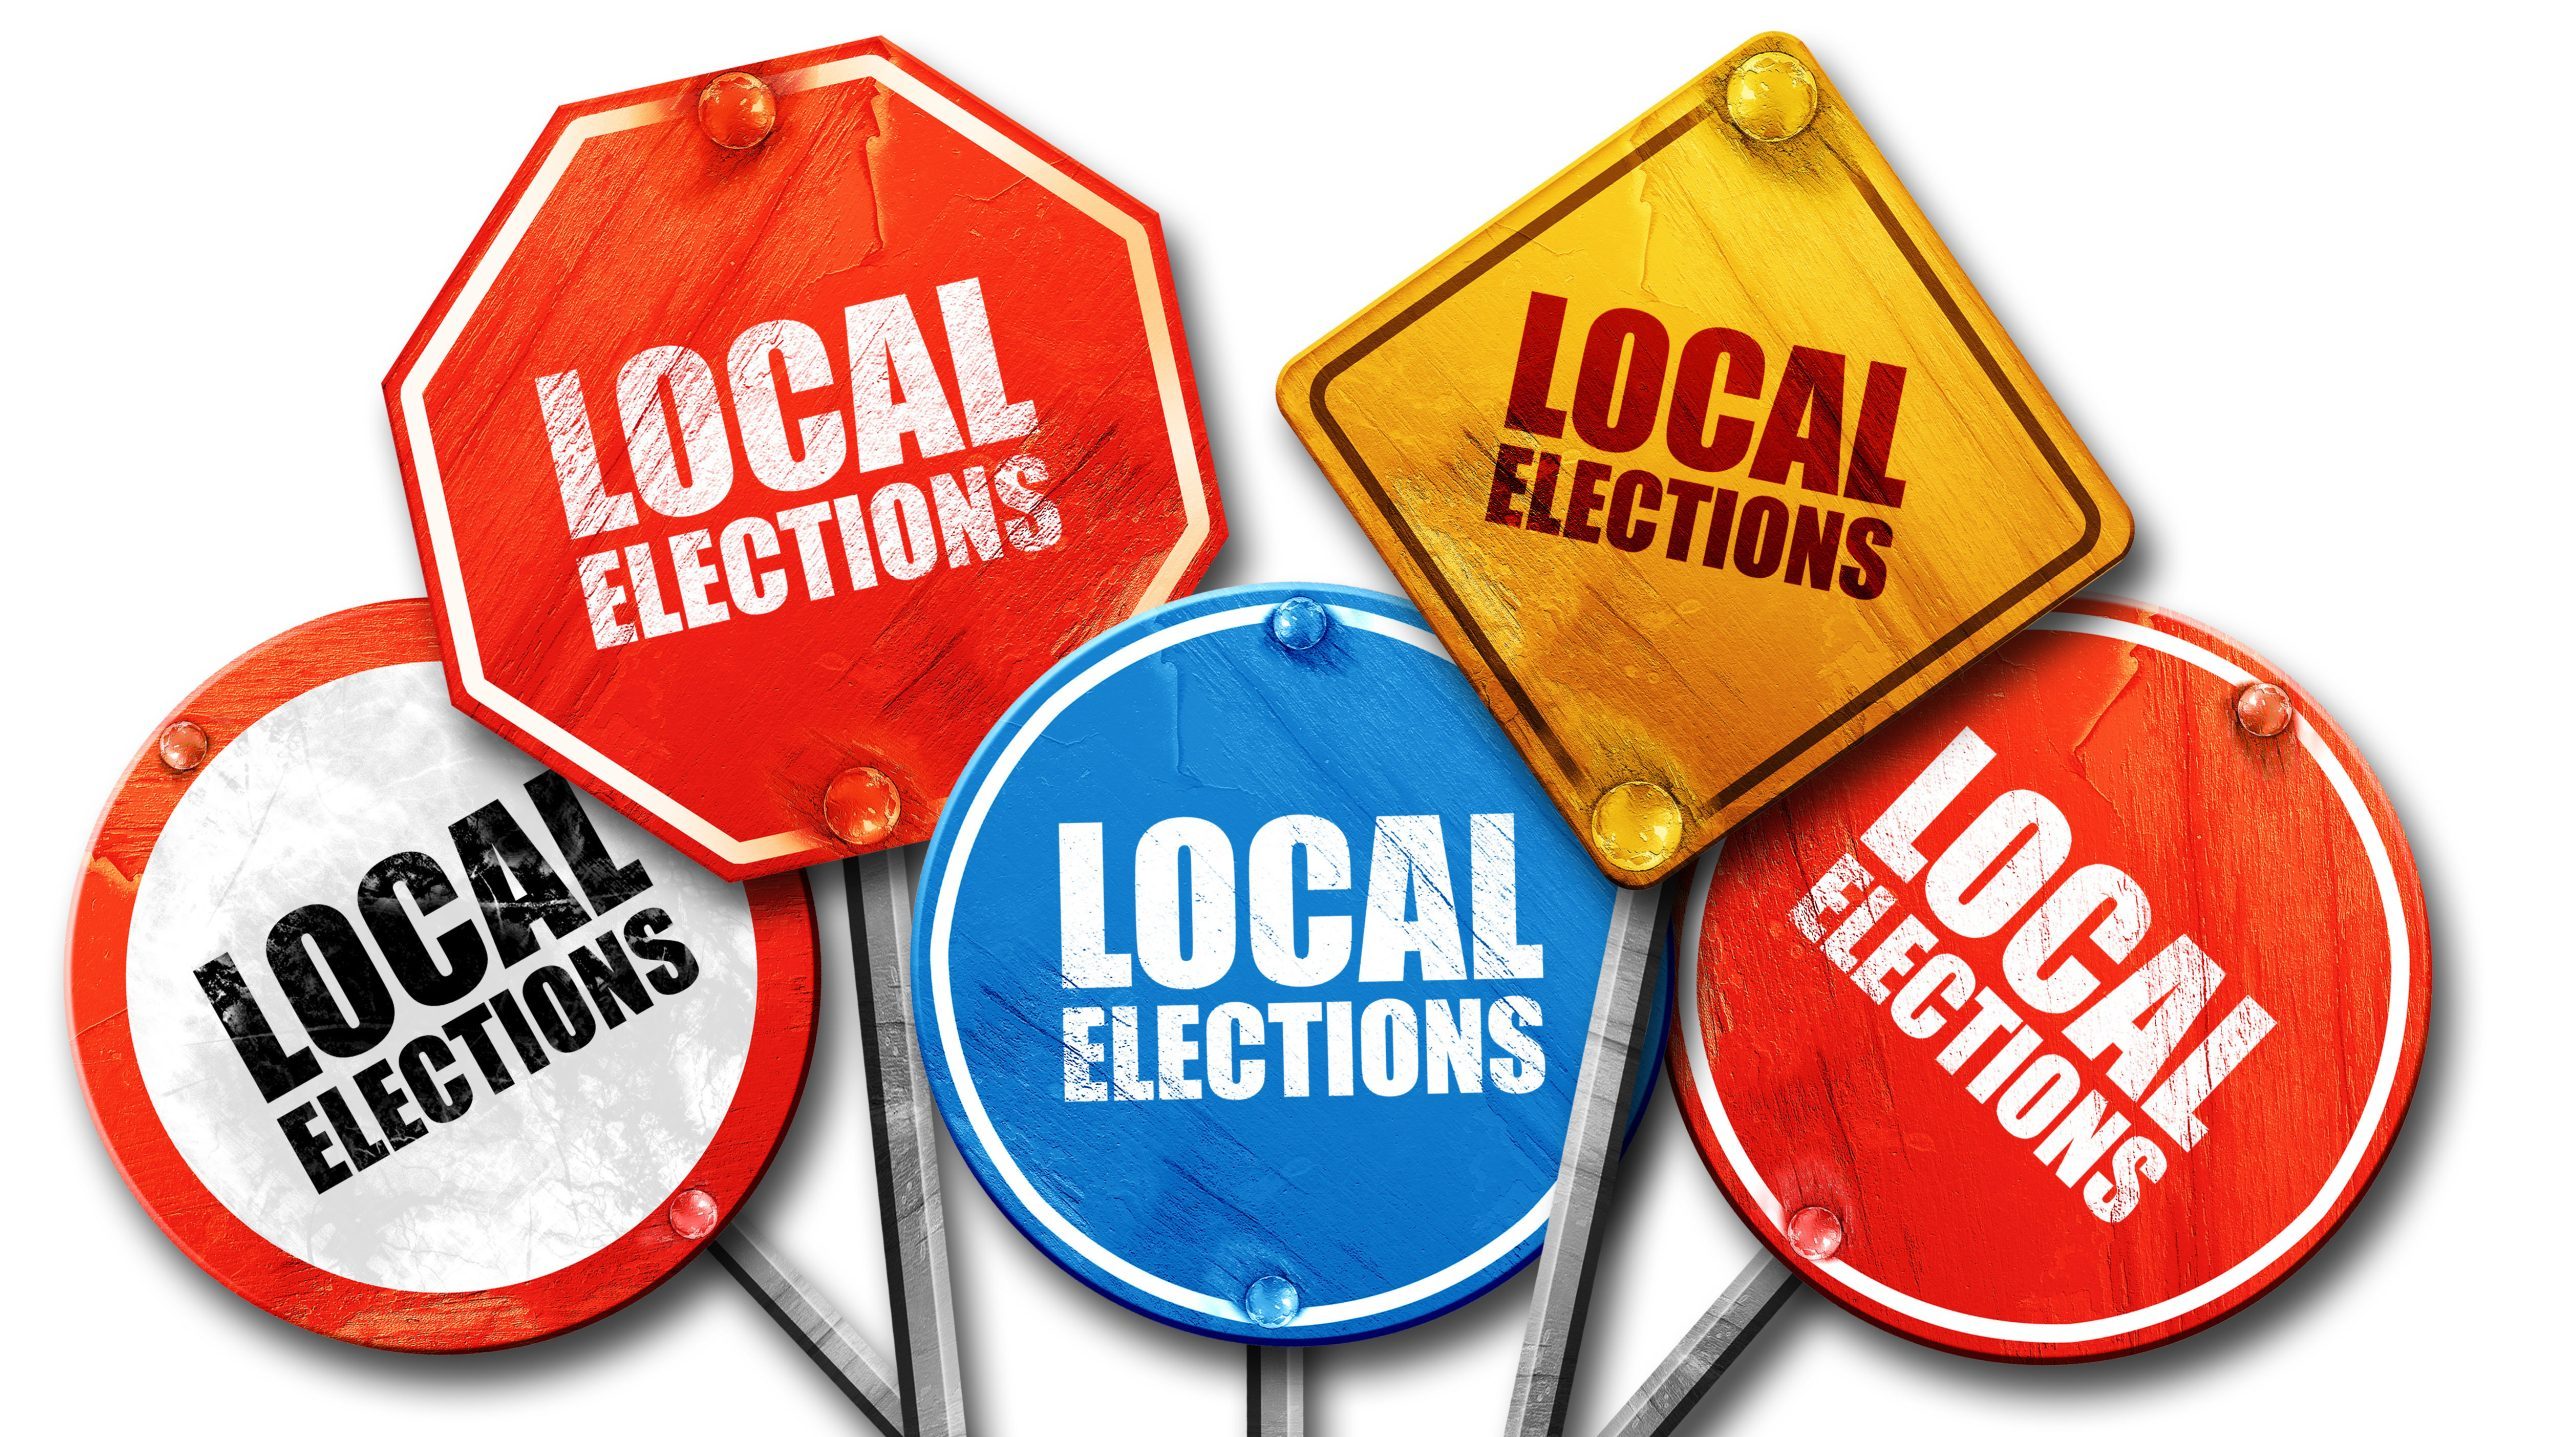 local elections, 3D rendering, street signs